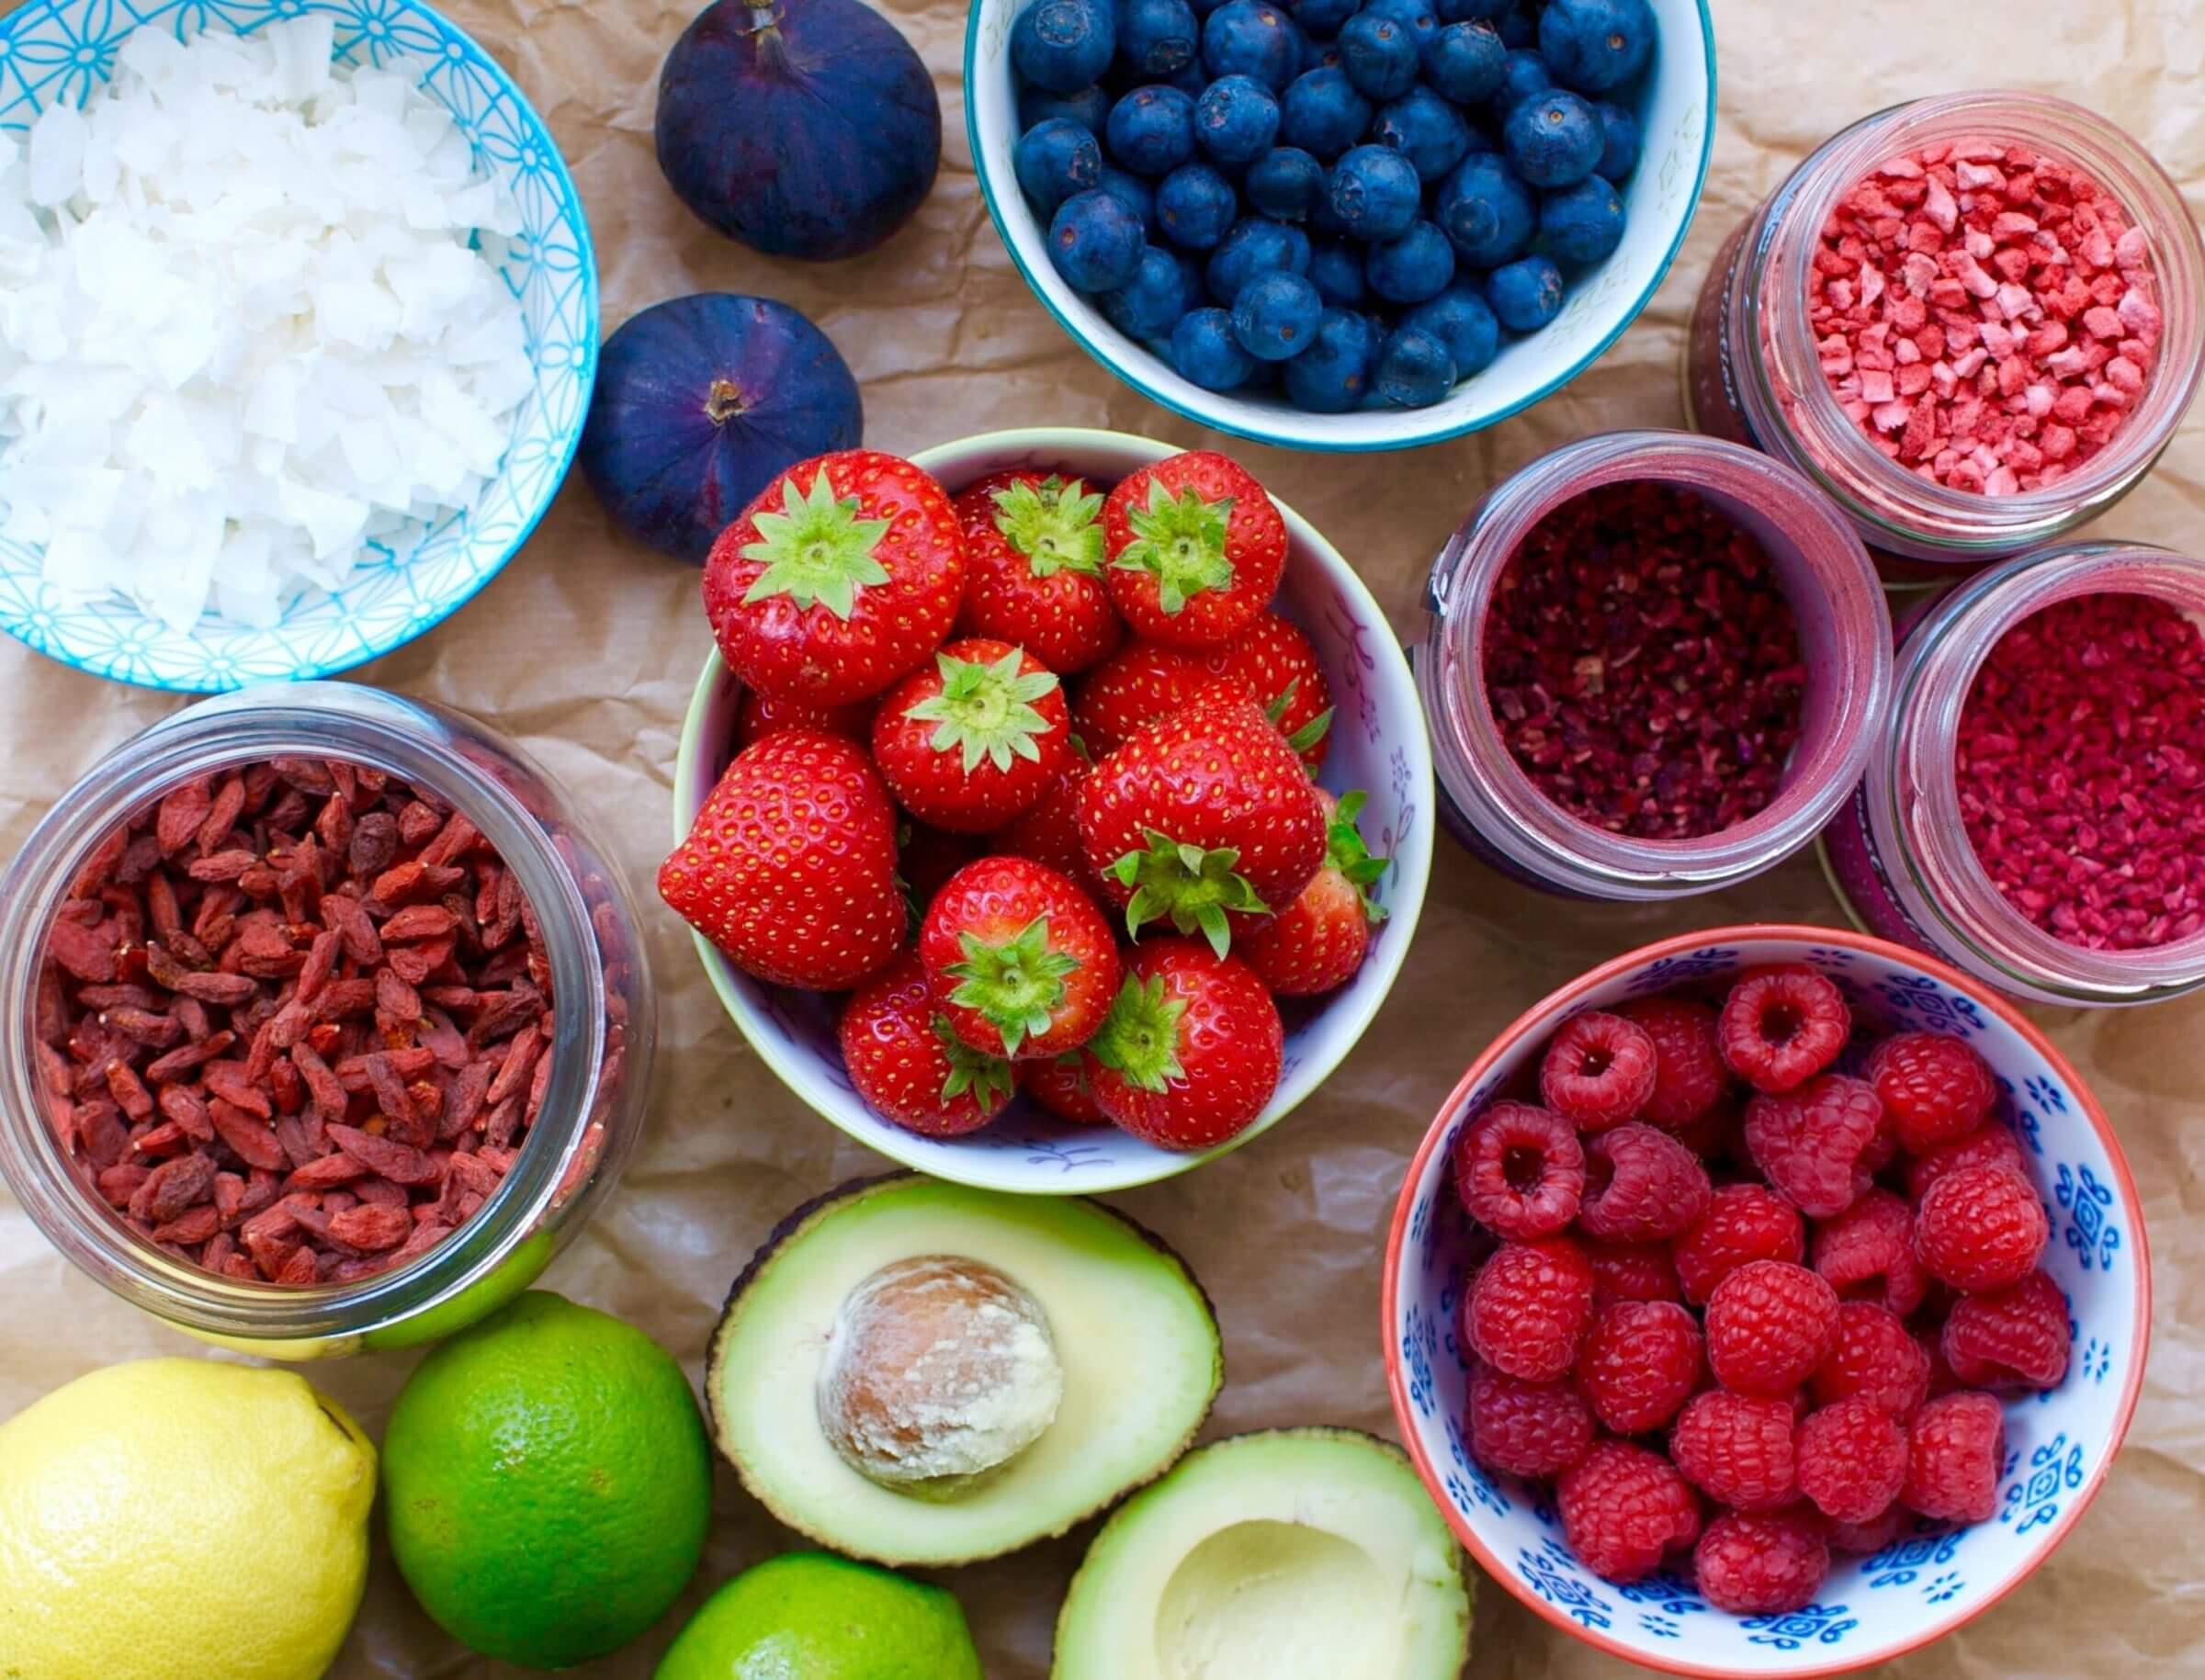 Berries, avocado and other healthy foods (except for the sugar-laden figs)